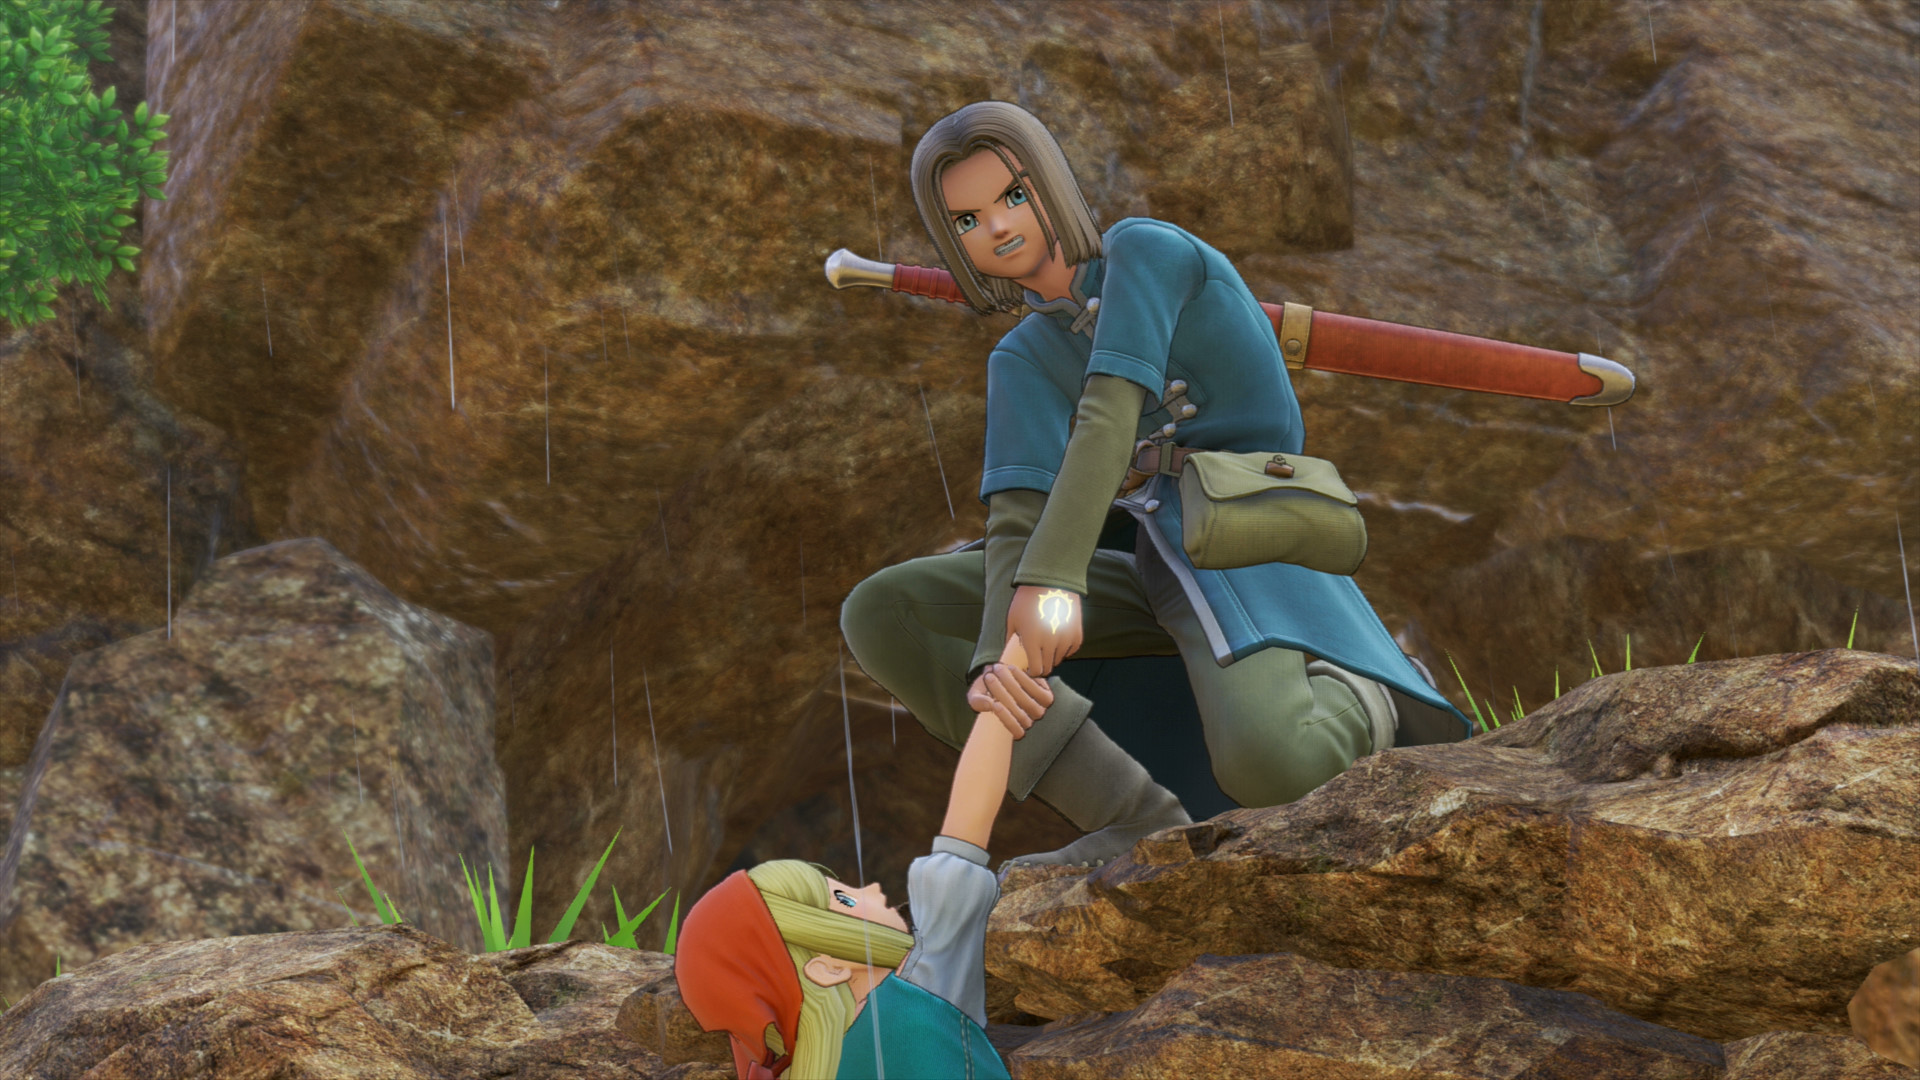 Best anime games: Dragon Quest XI. Image shows a boy pulling a girl up a rocky ledge.